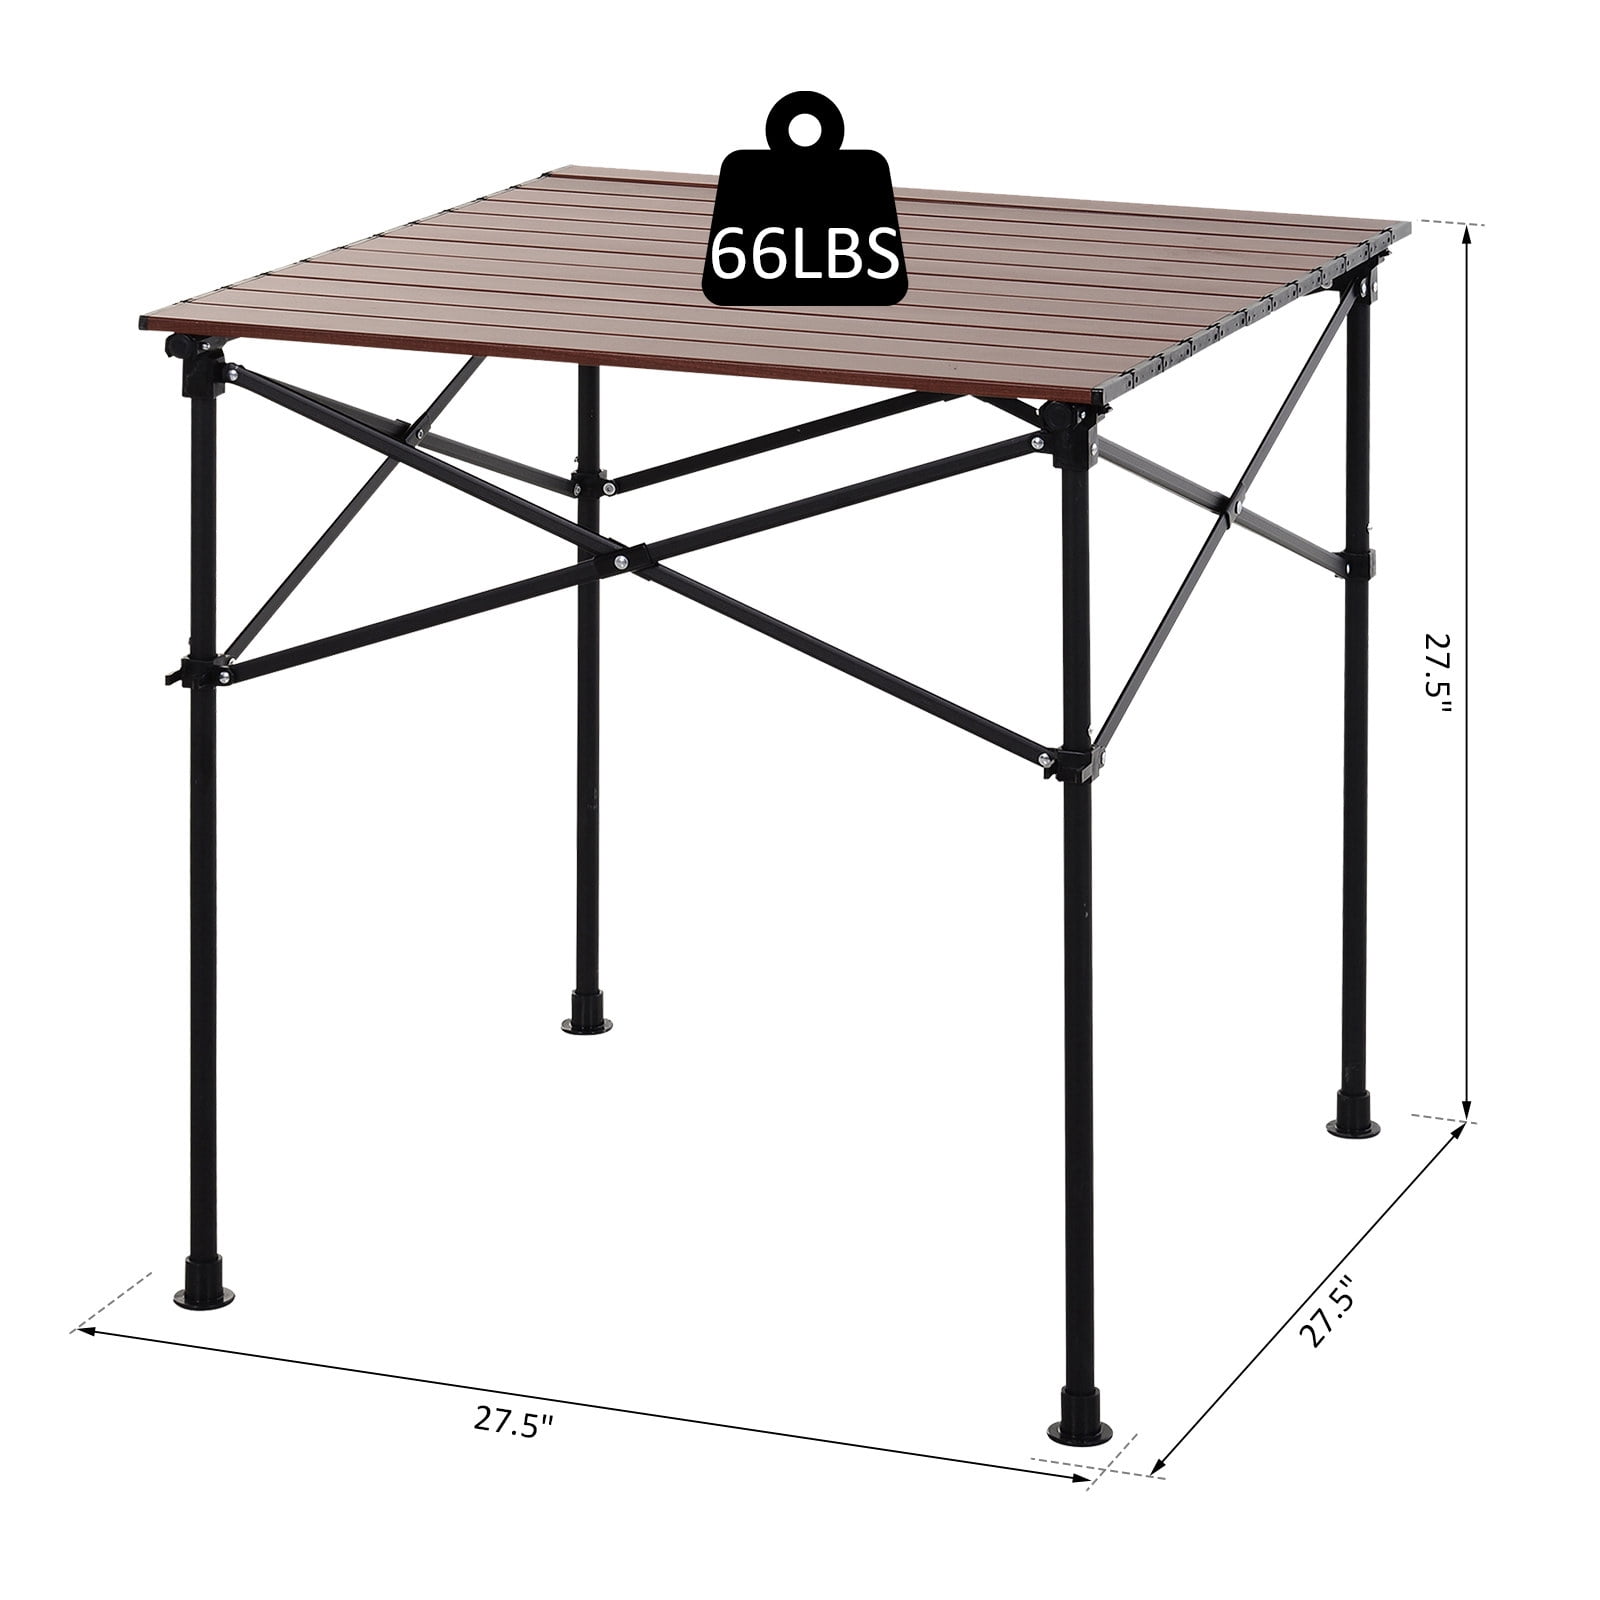 Aluminum Folding Picnic Table Roll-up Top Outdoor Indoor Desk w/Carrying Bag 